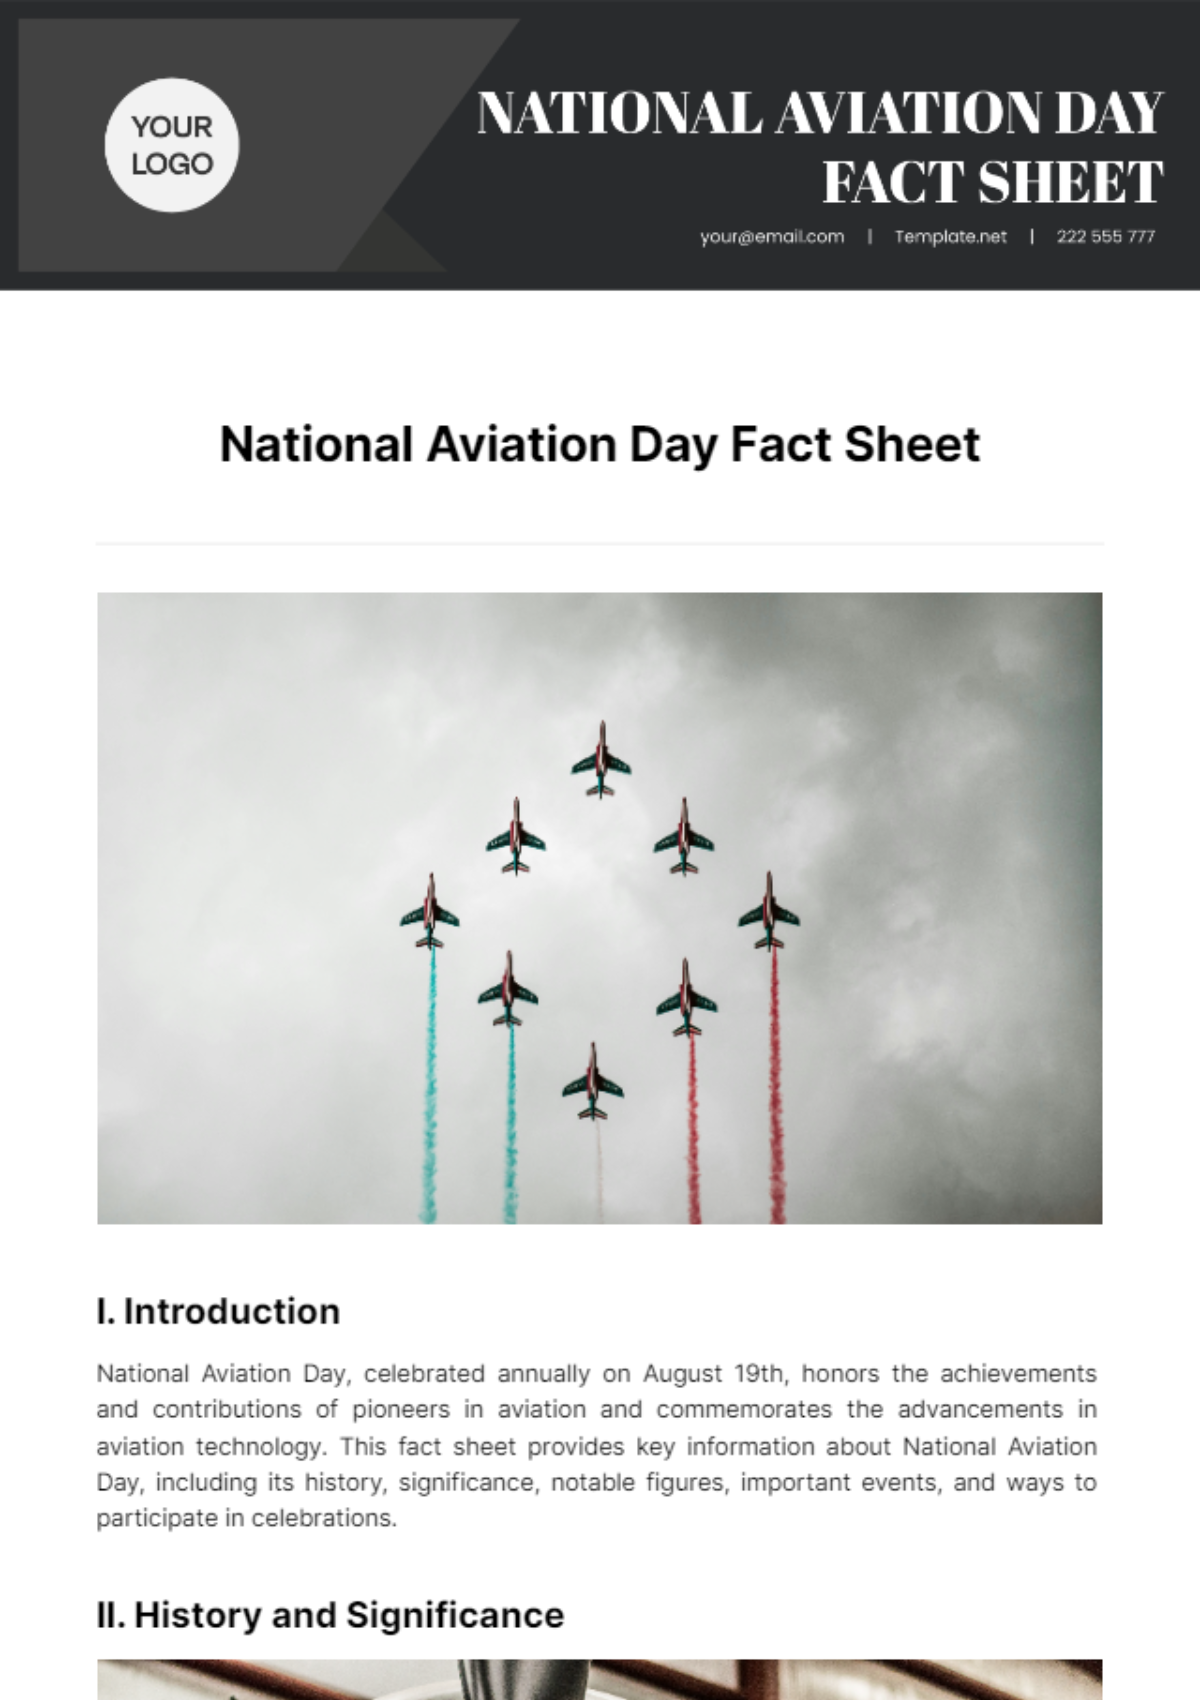 National Aviation Day Factsheet Template